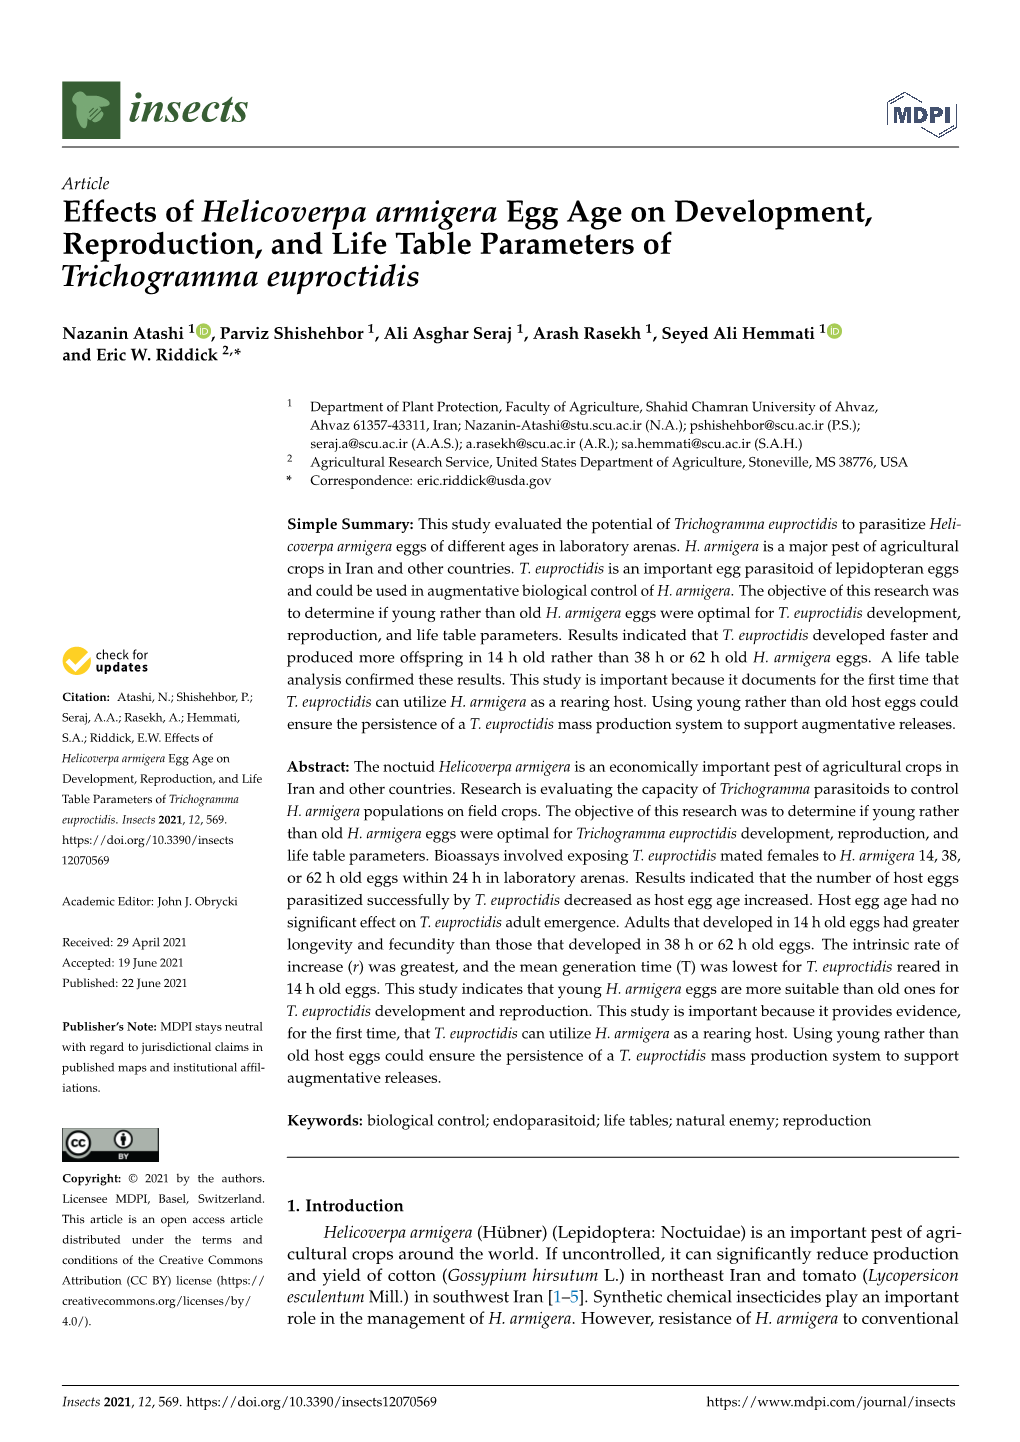 Effects of Helicoverpa Armigera Egg Age on Development, Reproduction, and Life Table Parameters of Trichogramma Euproctidis